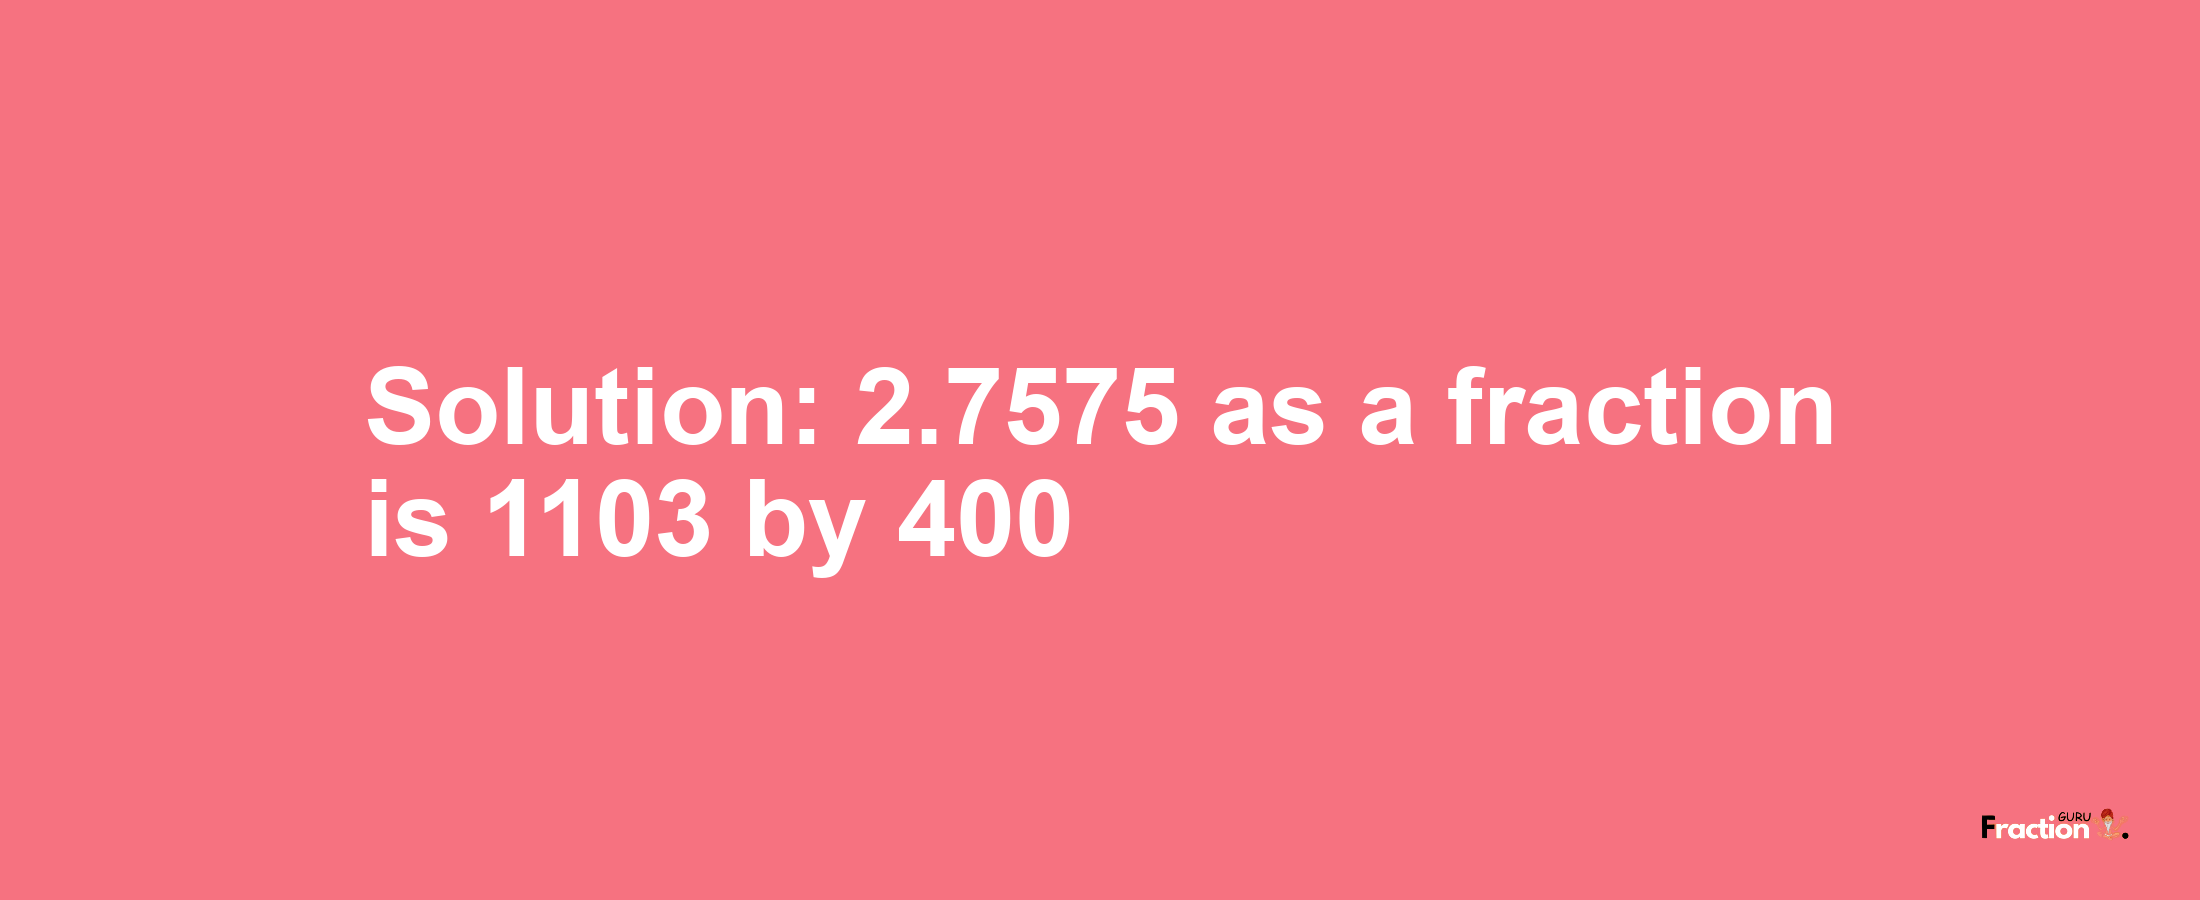 Solution:2.7575 as a fraction is 1103/400